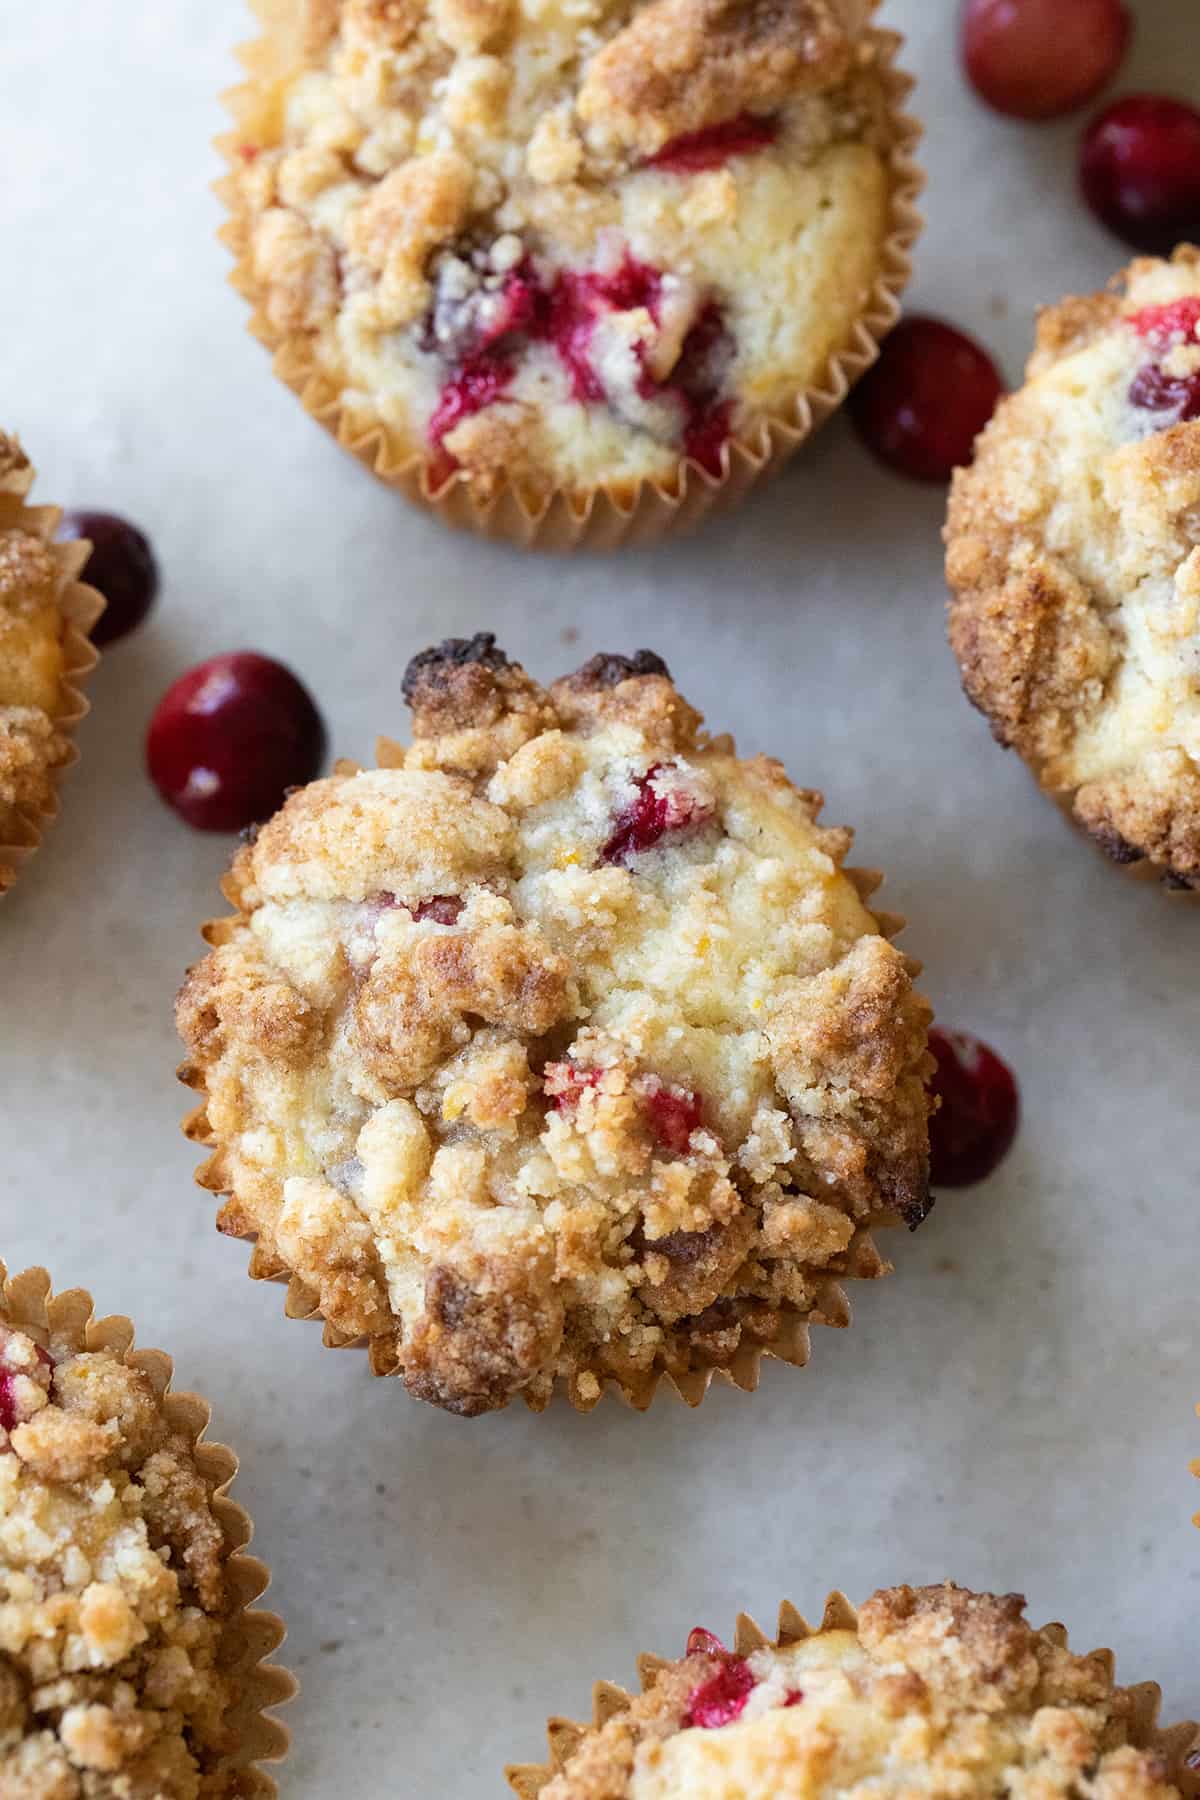 Moist muffin with a brown sugar topping and cranberries.